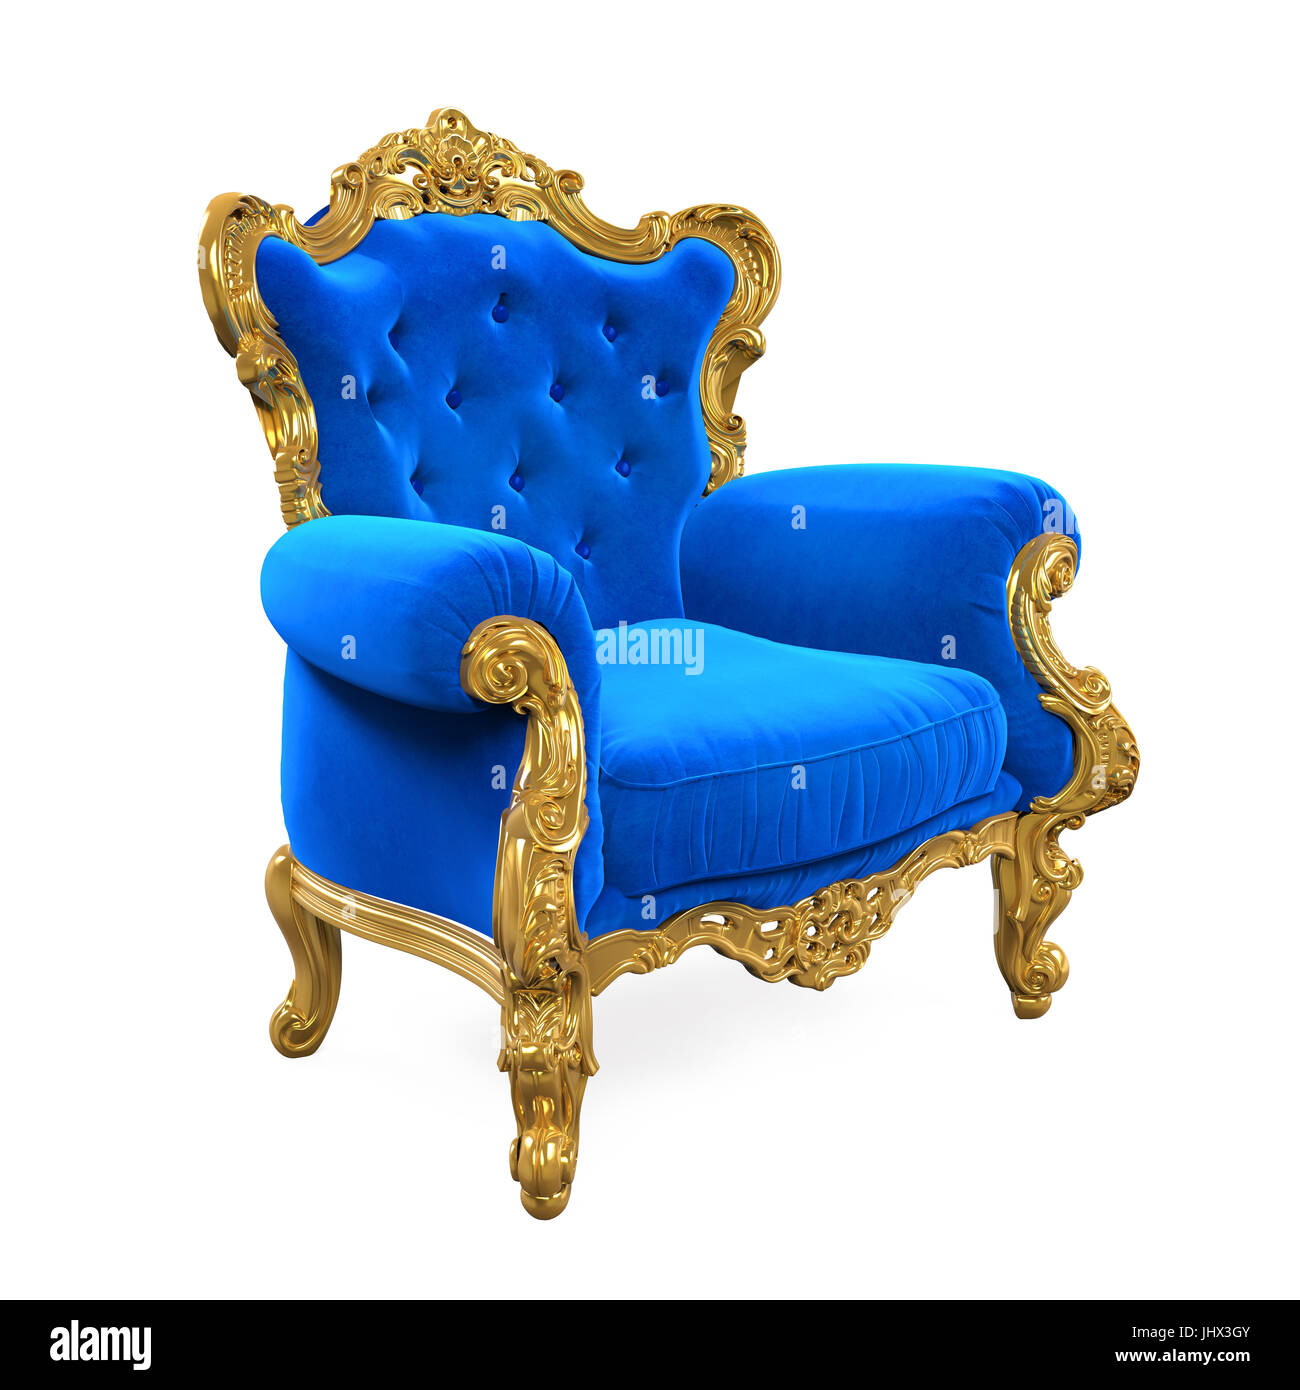 Blue Throne Chair Isolated Stock Photo